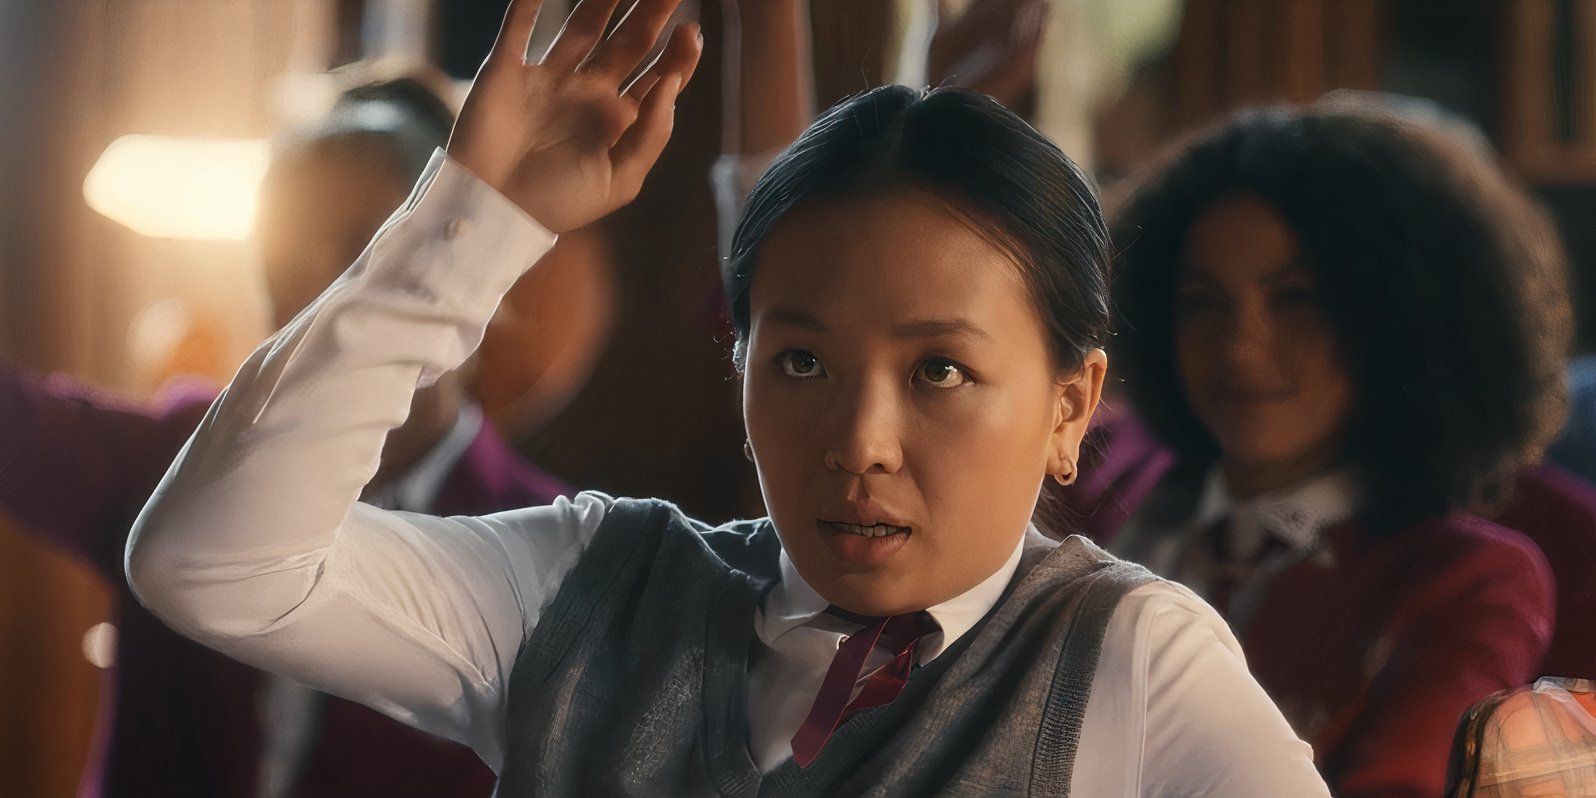 Andrea Guo as Lin Wang raising her hand and looking ashamed in Maxton Hall: The World Between Us